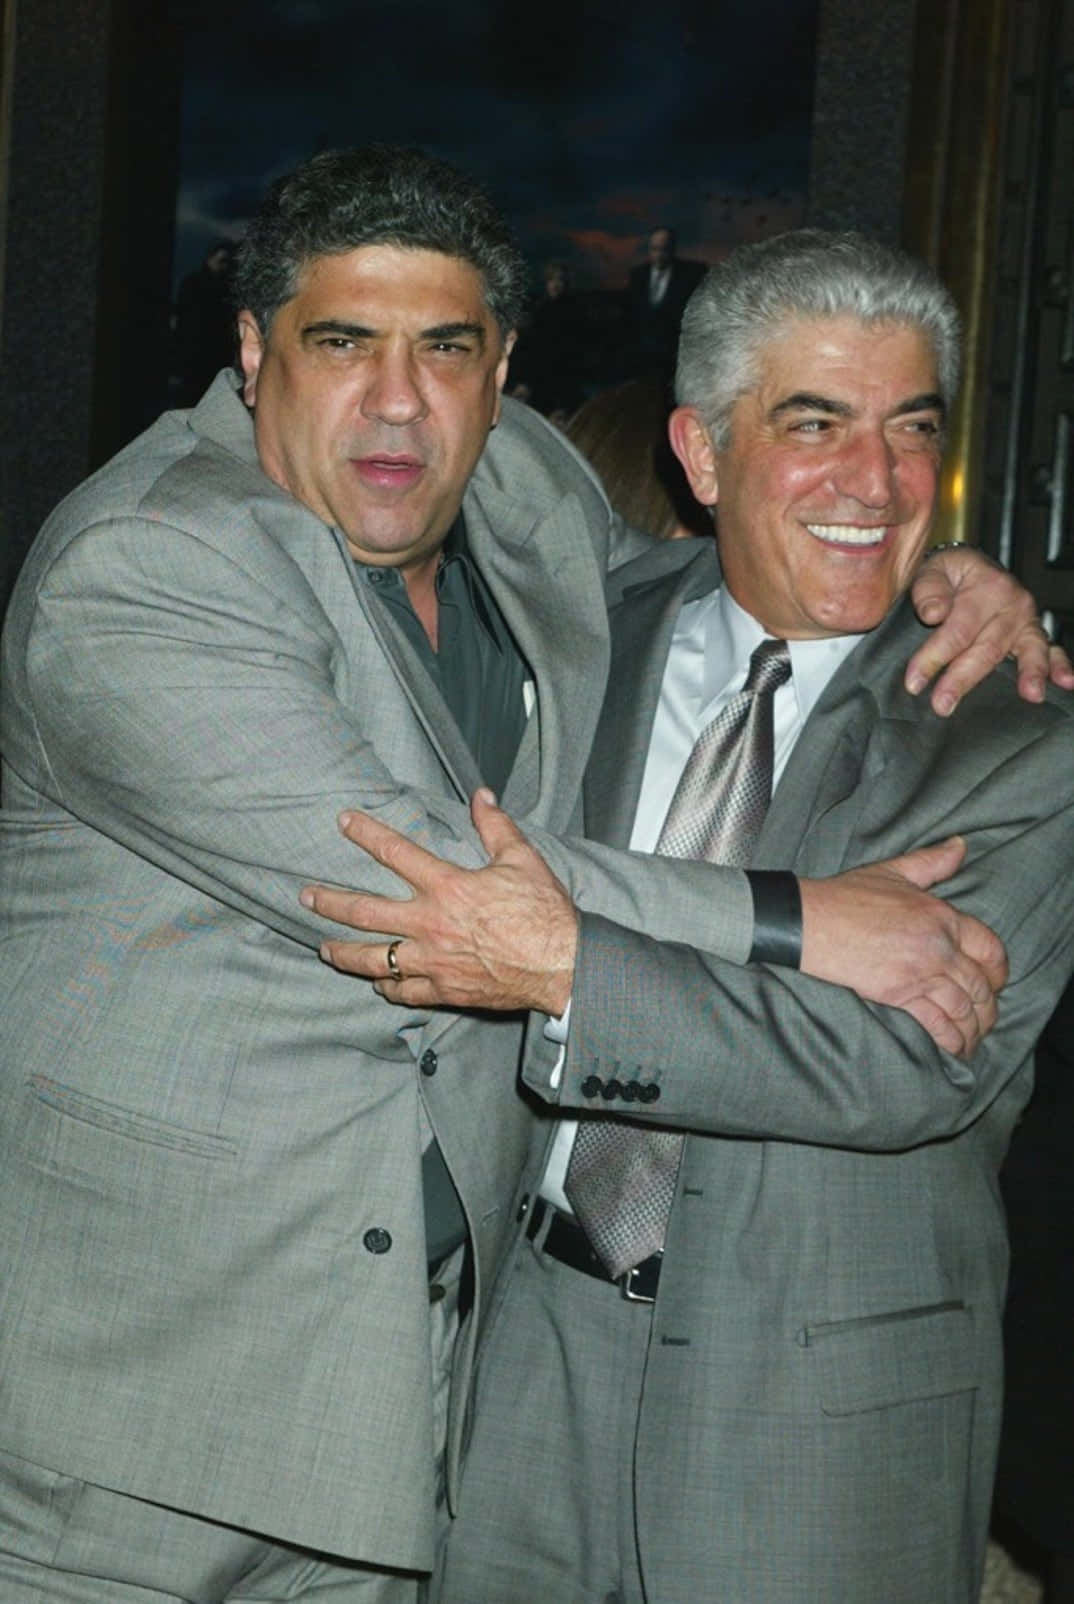 Frank Vincent Was A Versatile Actor Known For His Roles In Popular Movies Such As 